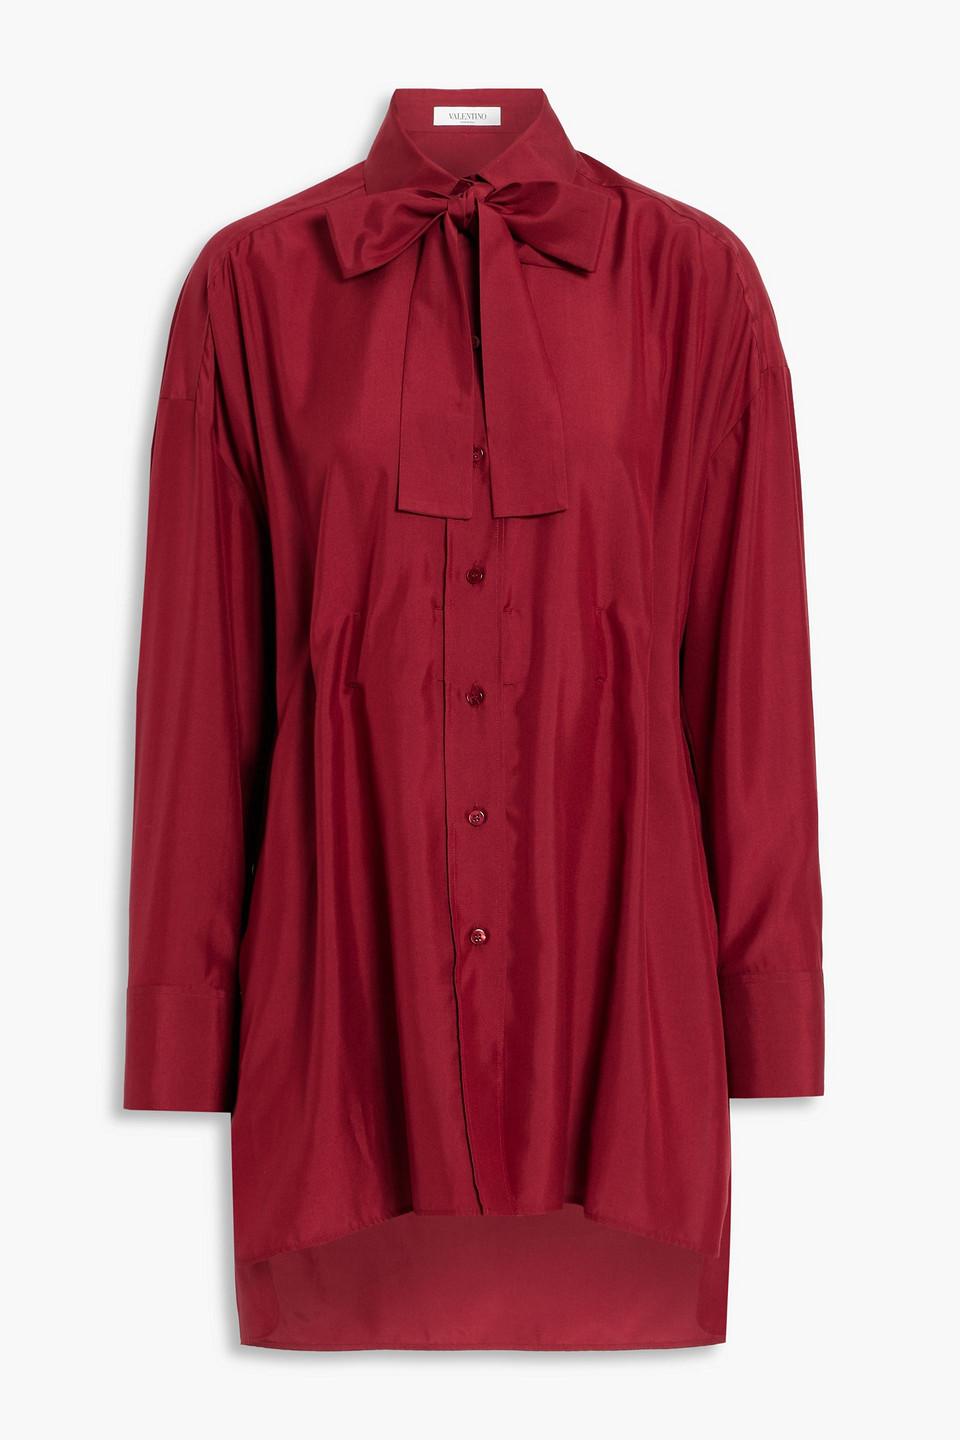 Valentino Pussy-bow Silk-satin Crepe Shirt in Red | Lyst